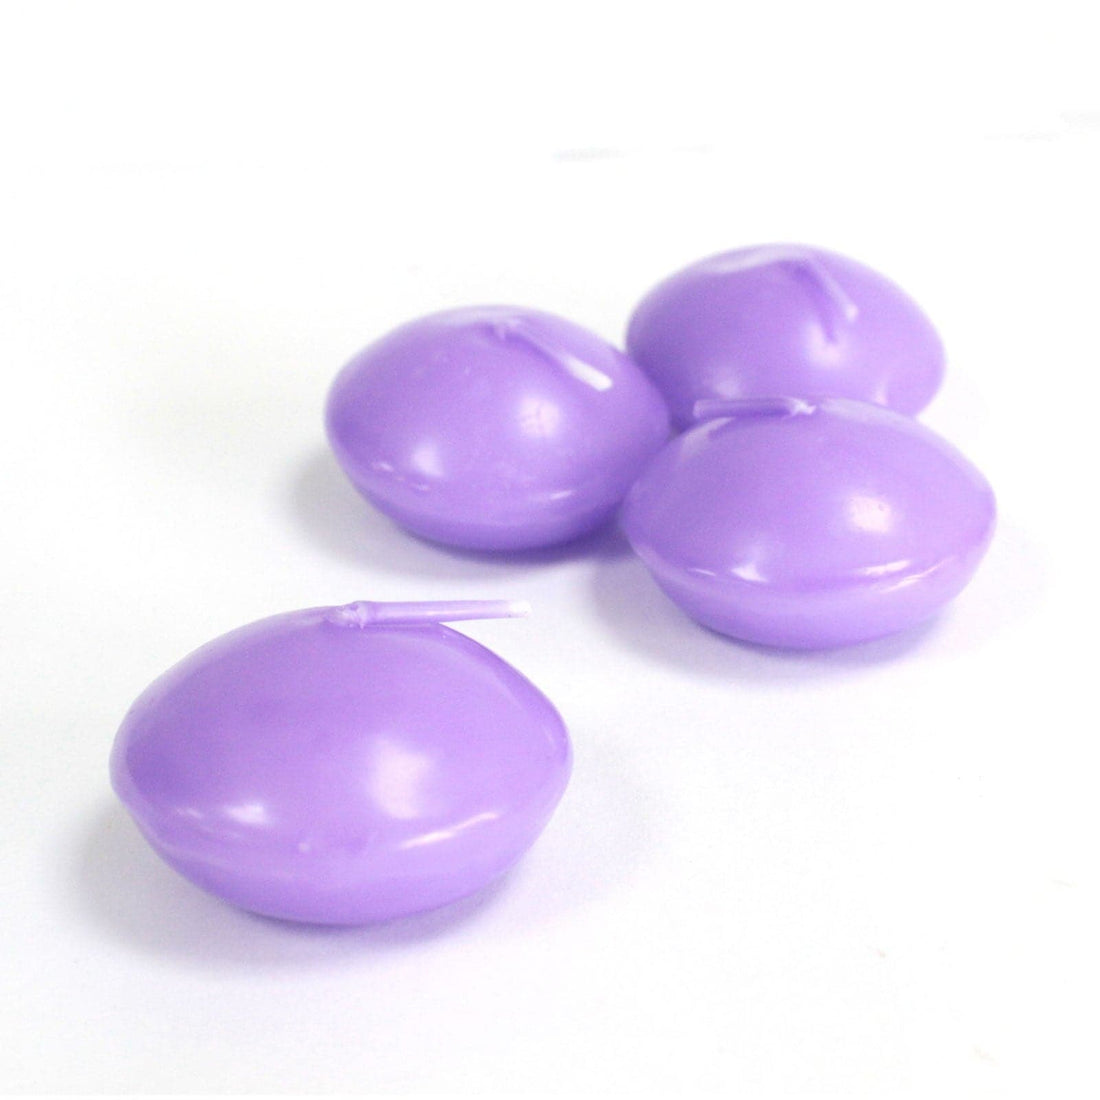 Small Floating Candles - Lilac - best price from Maltashopper.com FLCAND-03